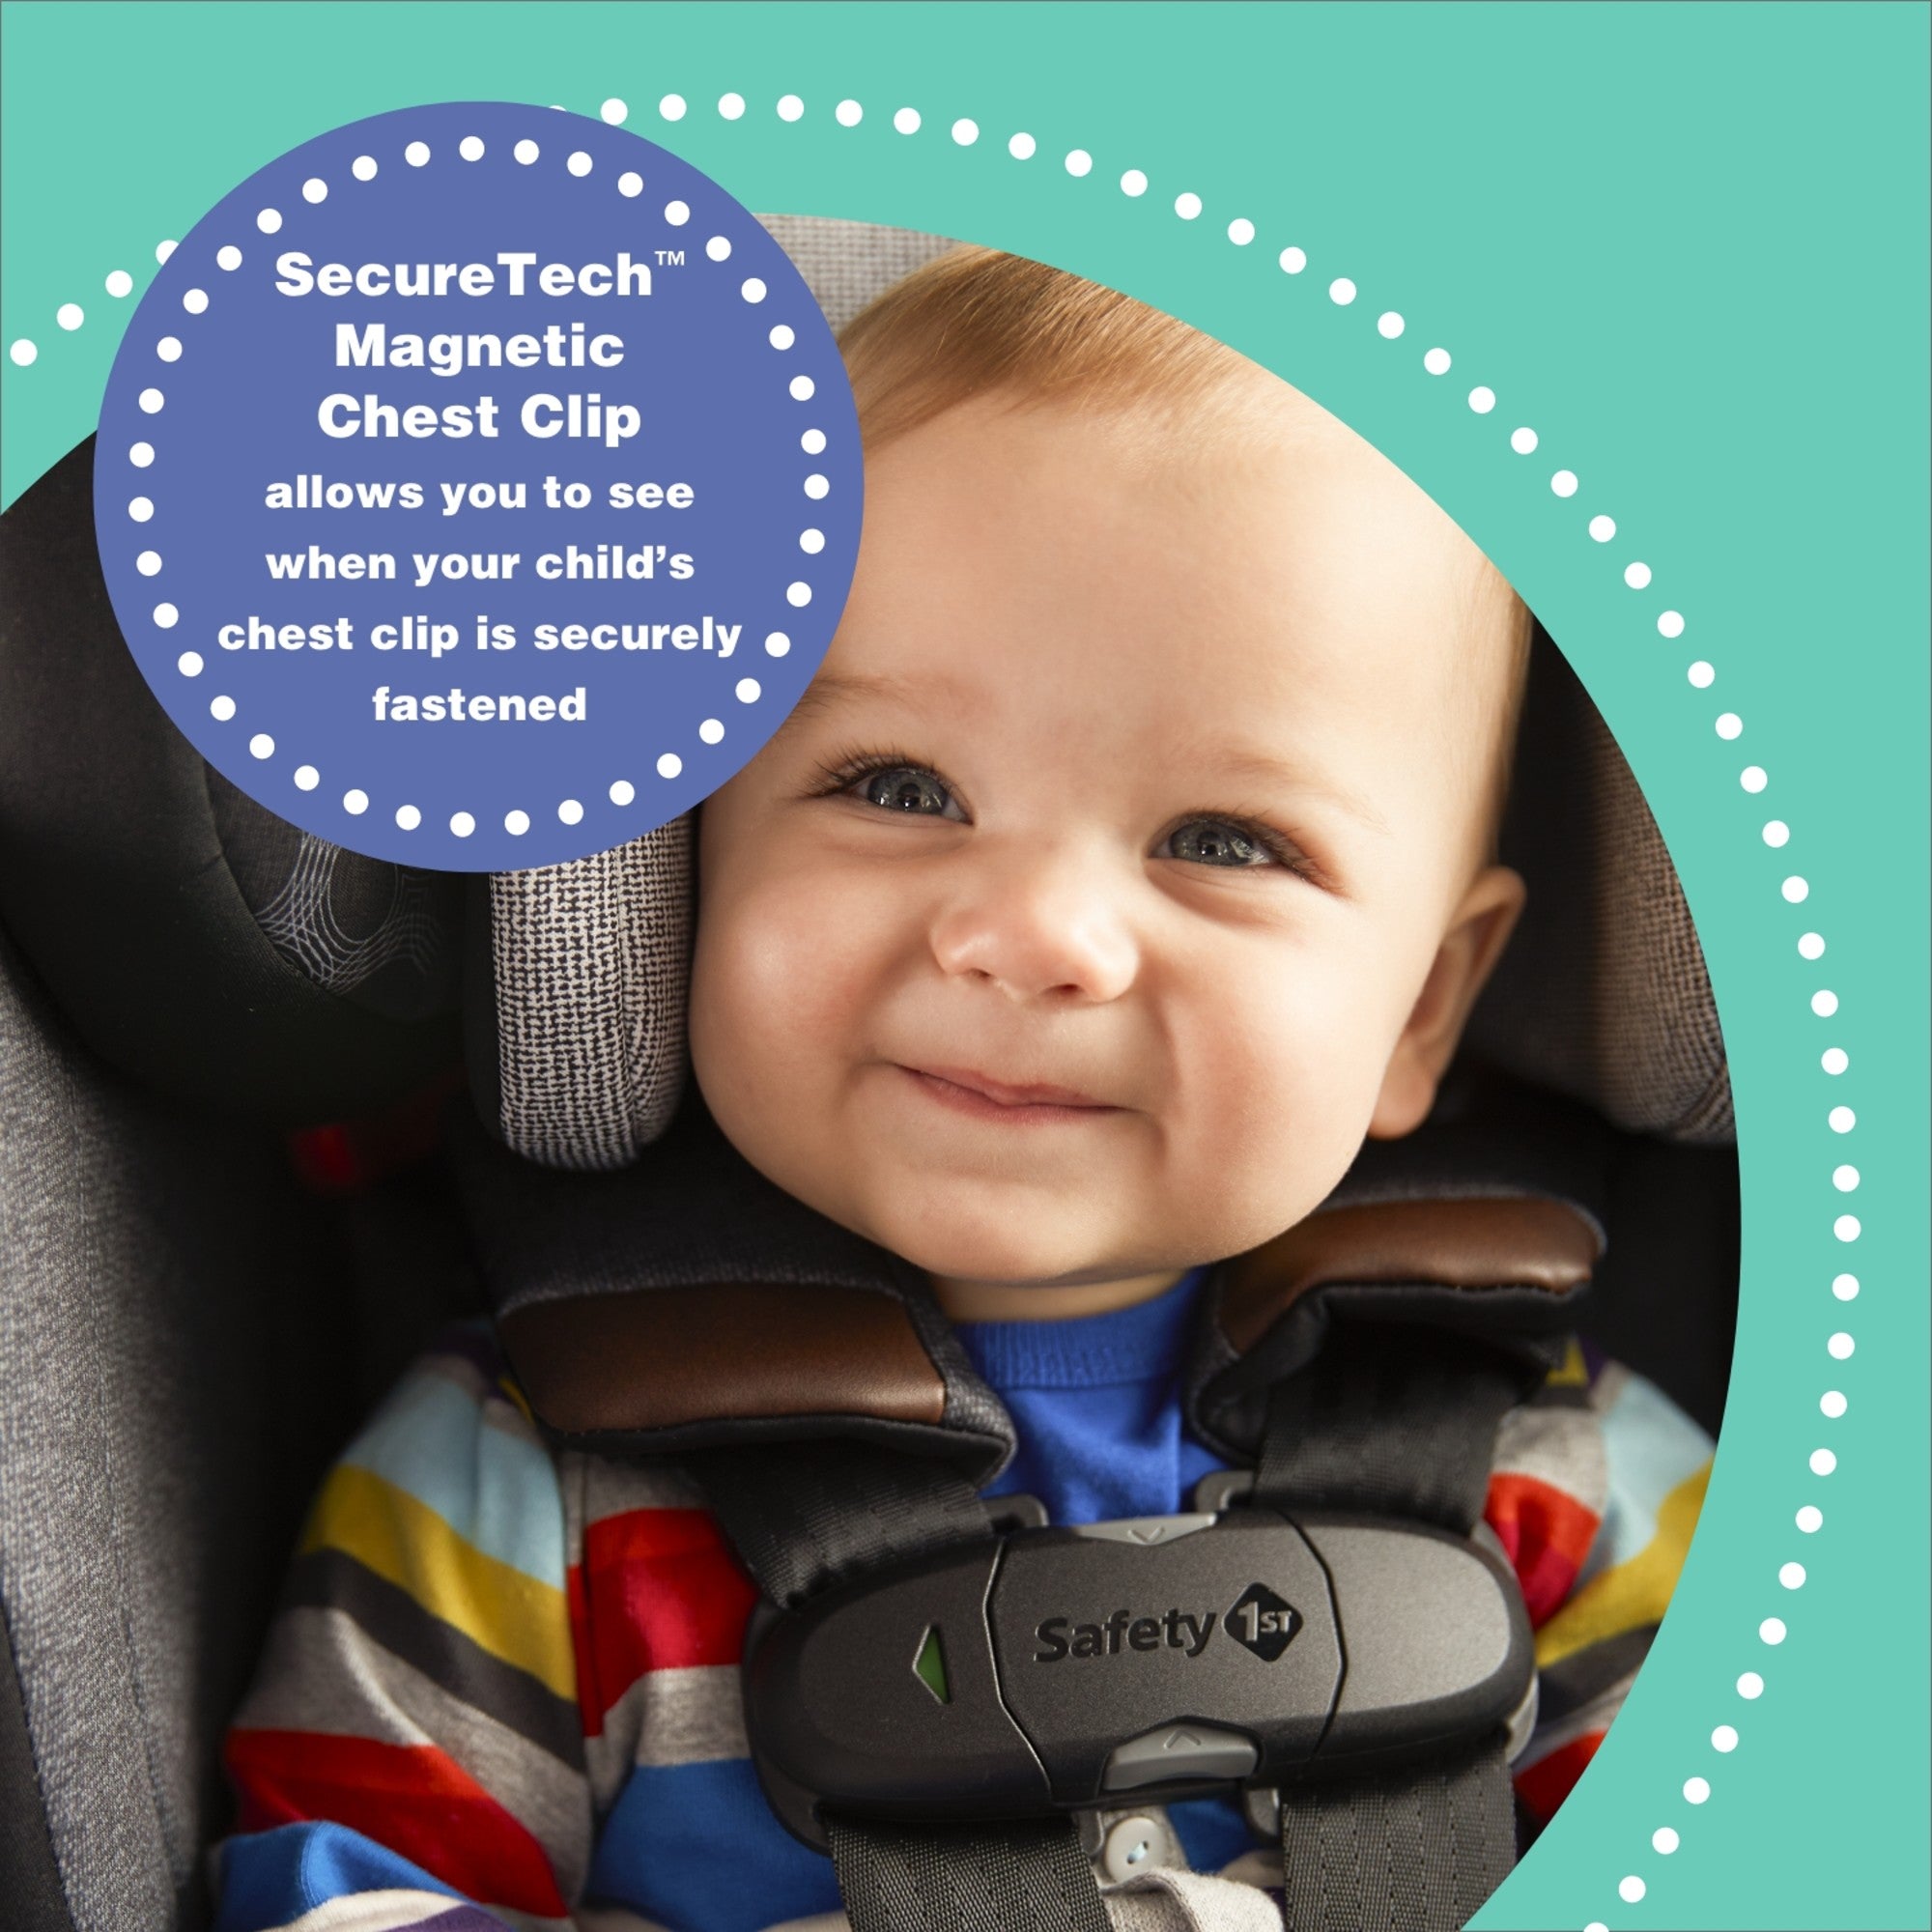 Disney Baby EverSlim All-in-One Convertible Car Seat - SecureTech Magnetic Chest Clip allows you to see when your child's chest clip is securely fastened